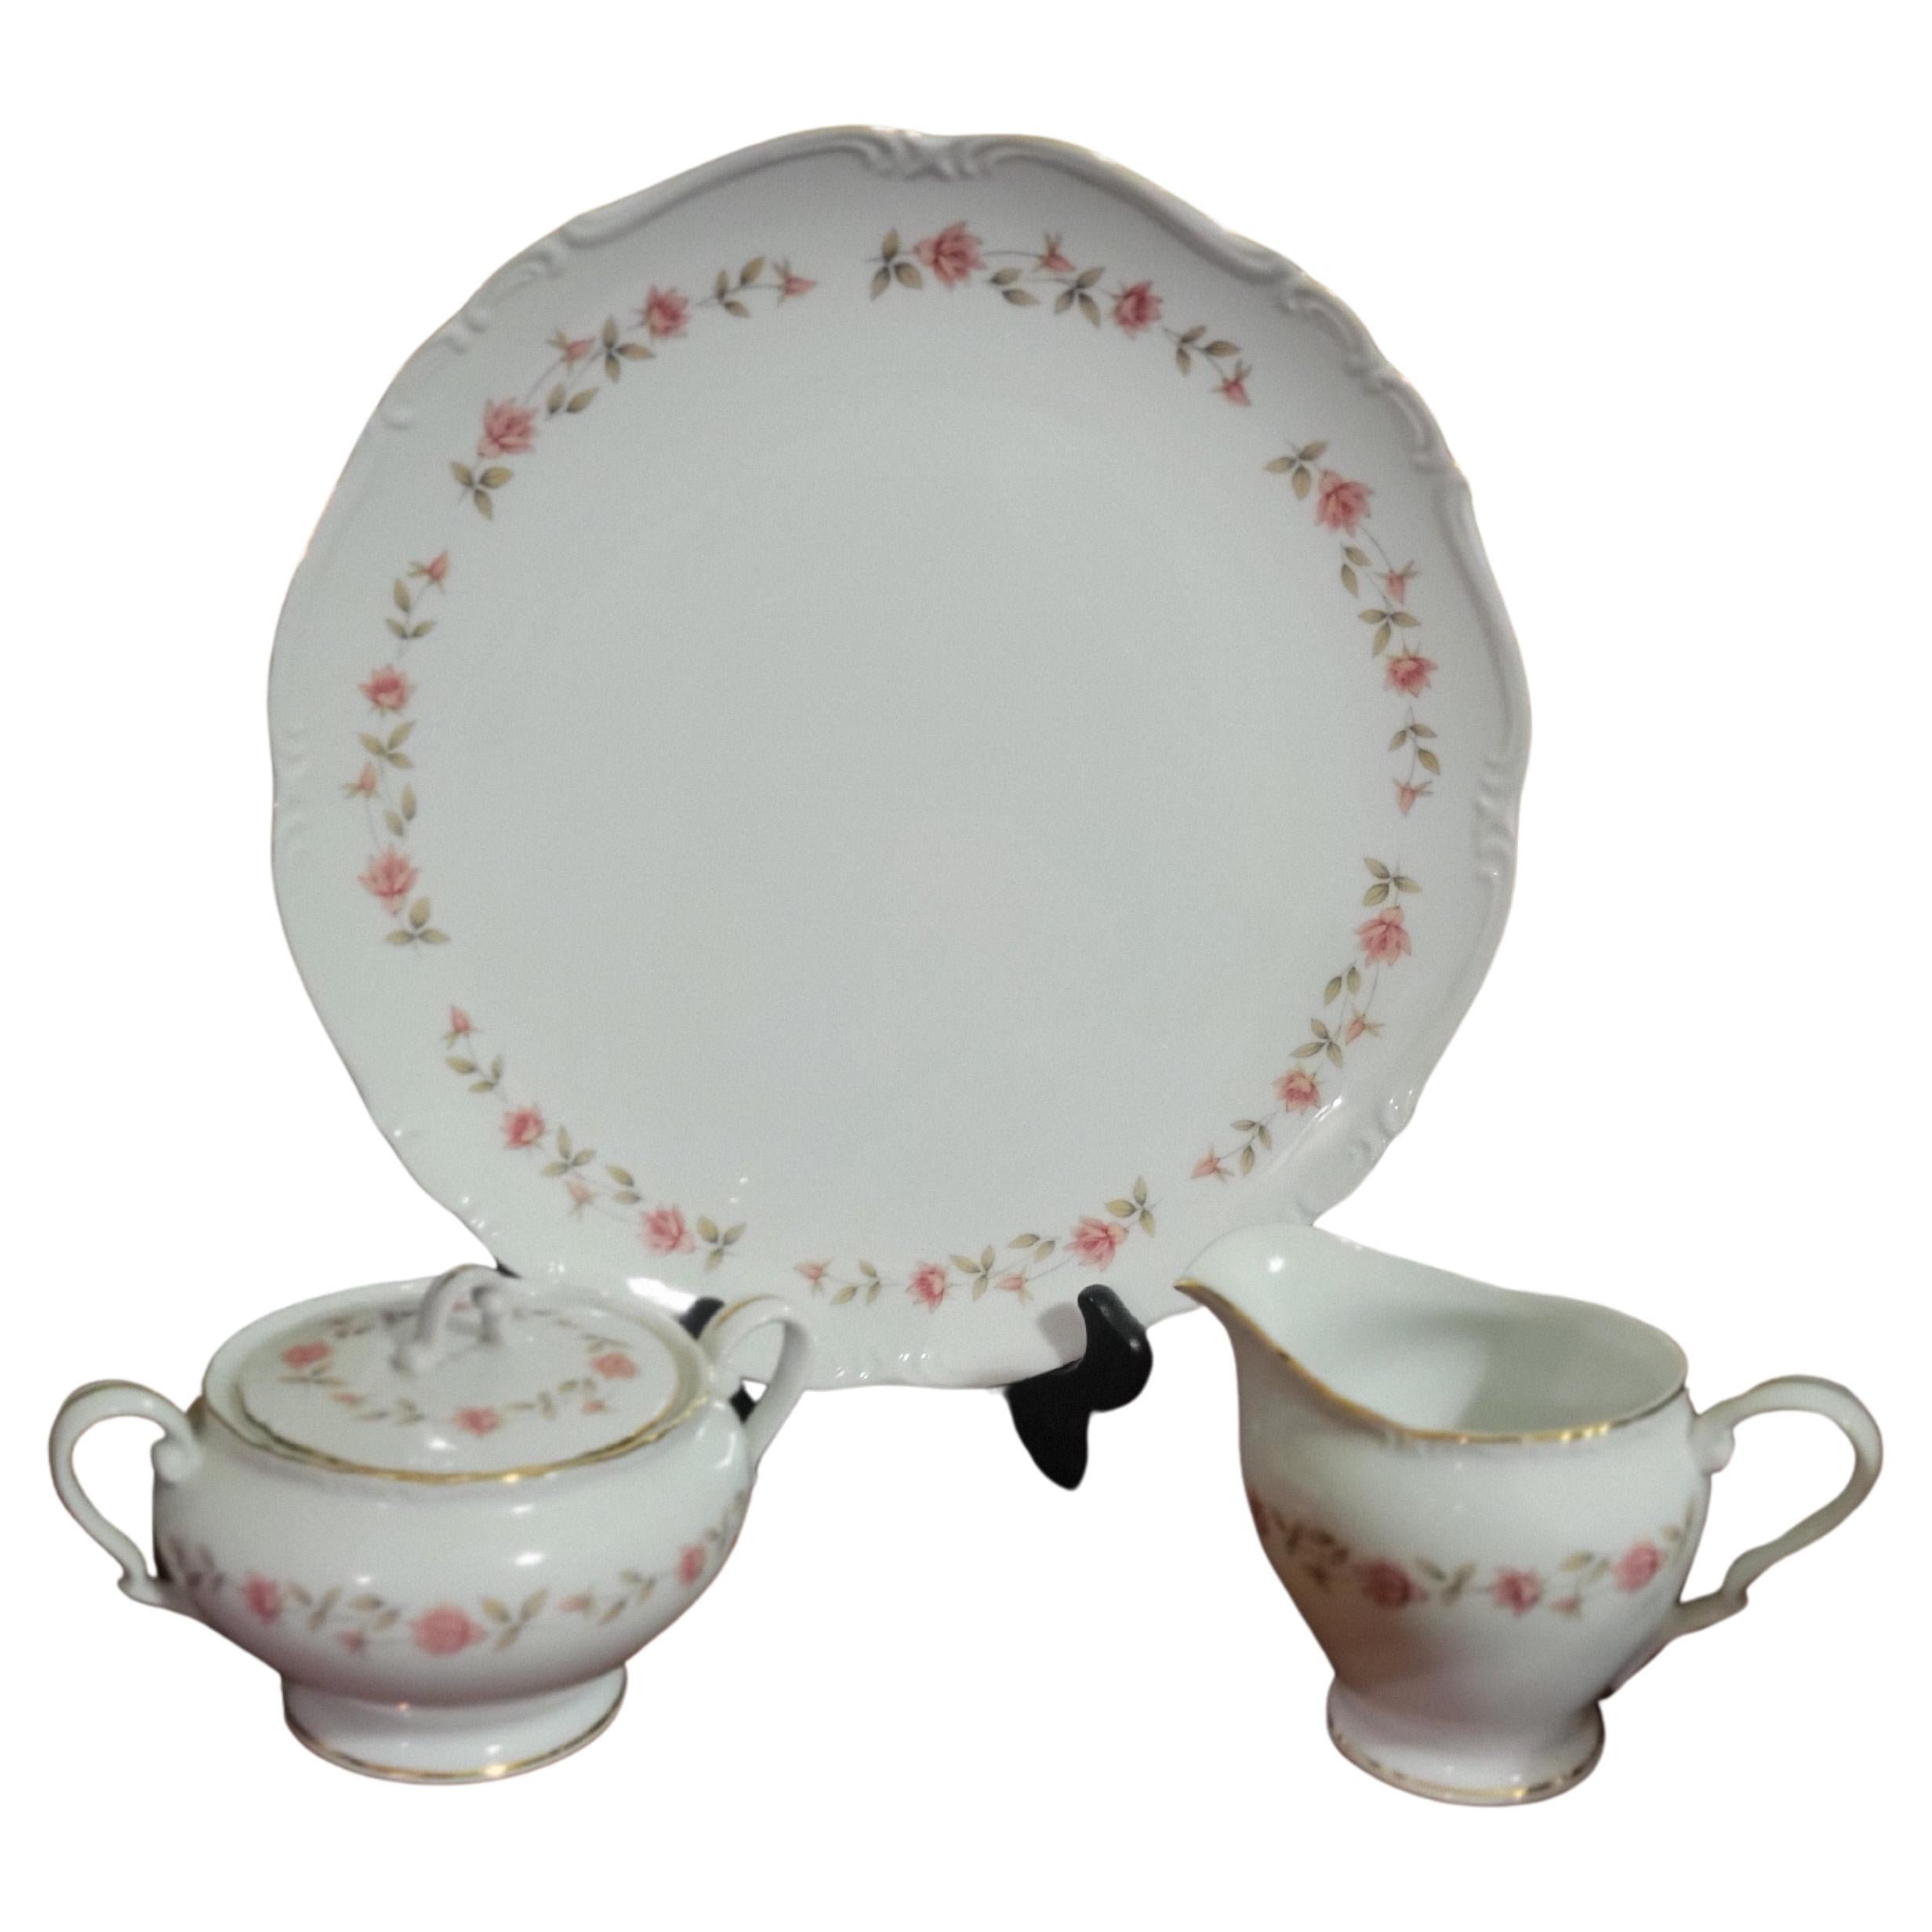 Vintage, Eternal Rose dining set. Made is Japan. 
The set consists of:
8 tea cups, 
8 saucers, 
8 snack plates - 7.5